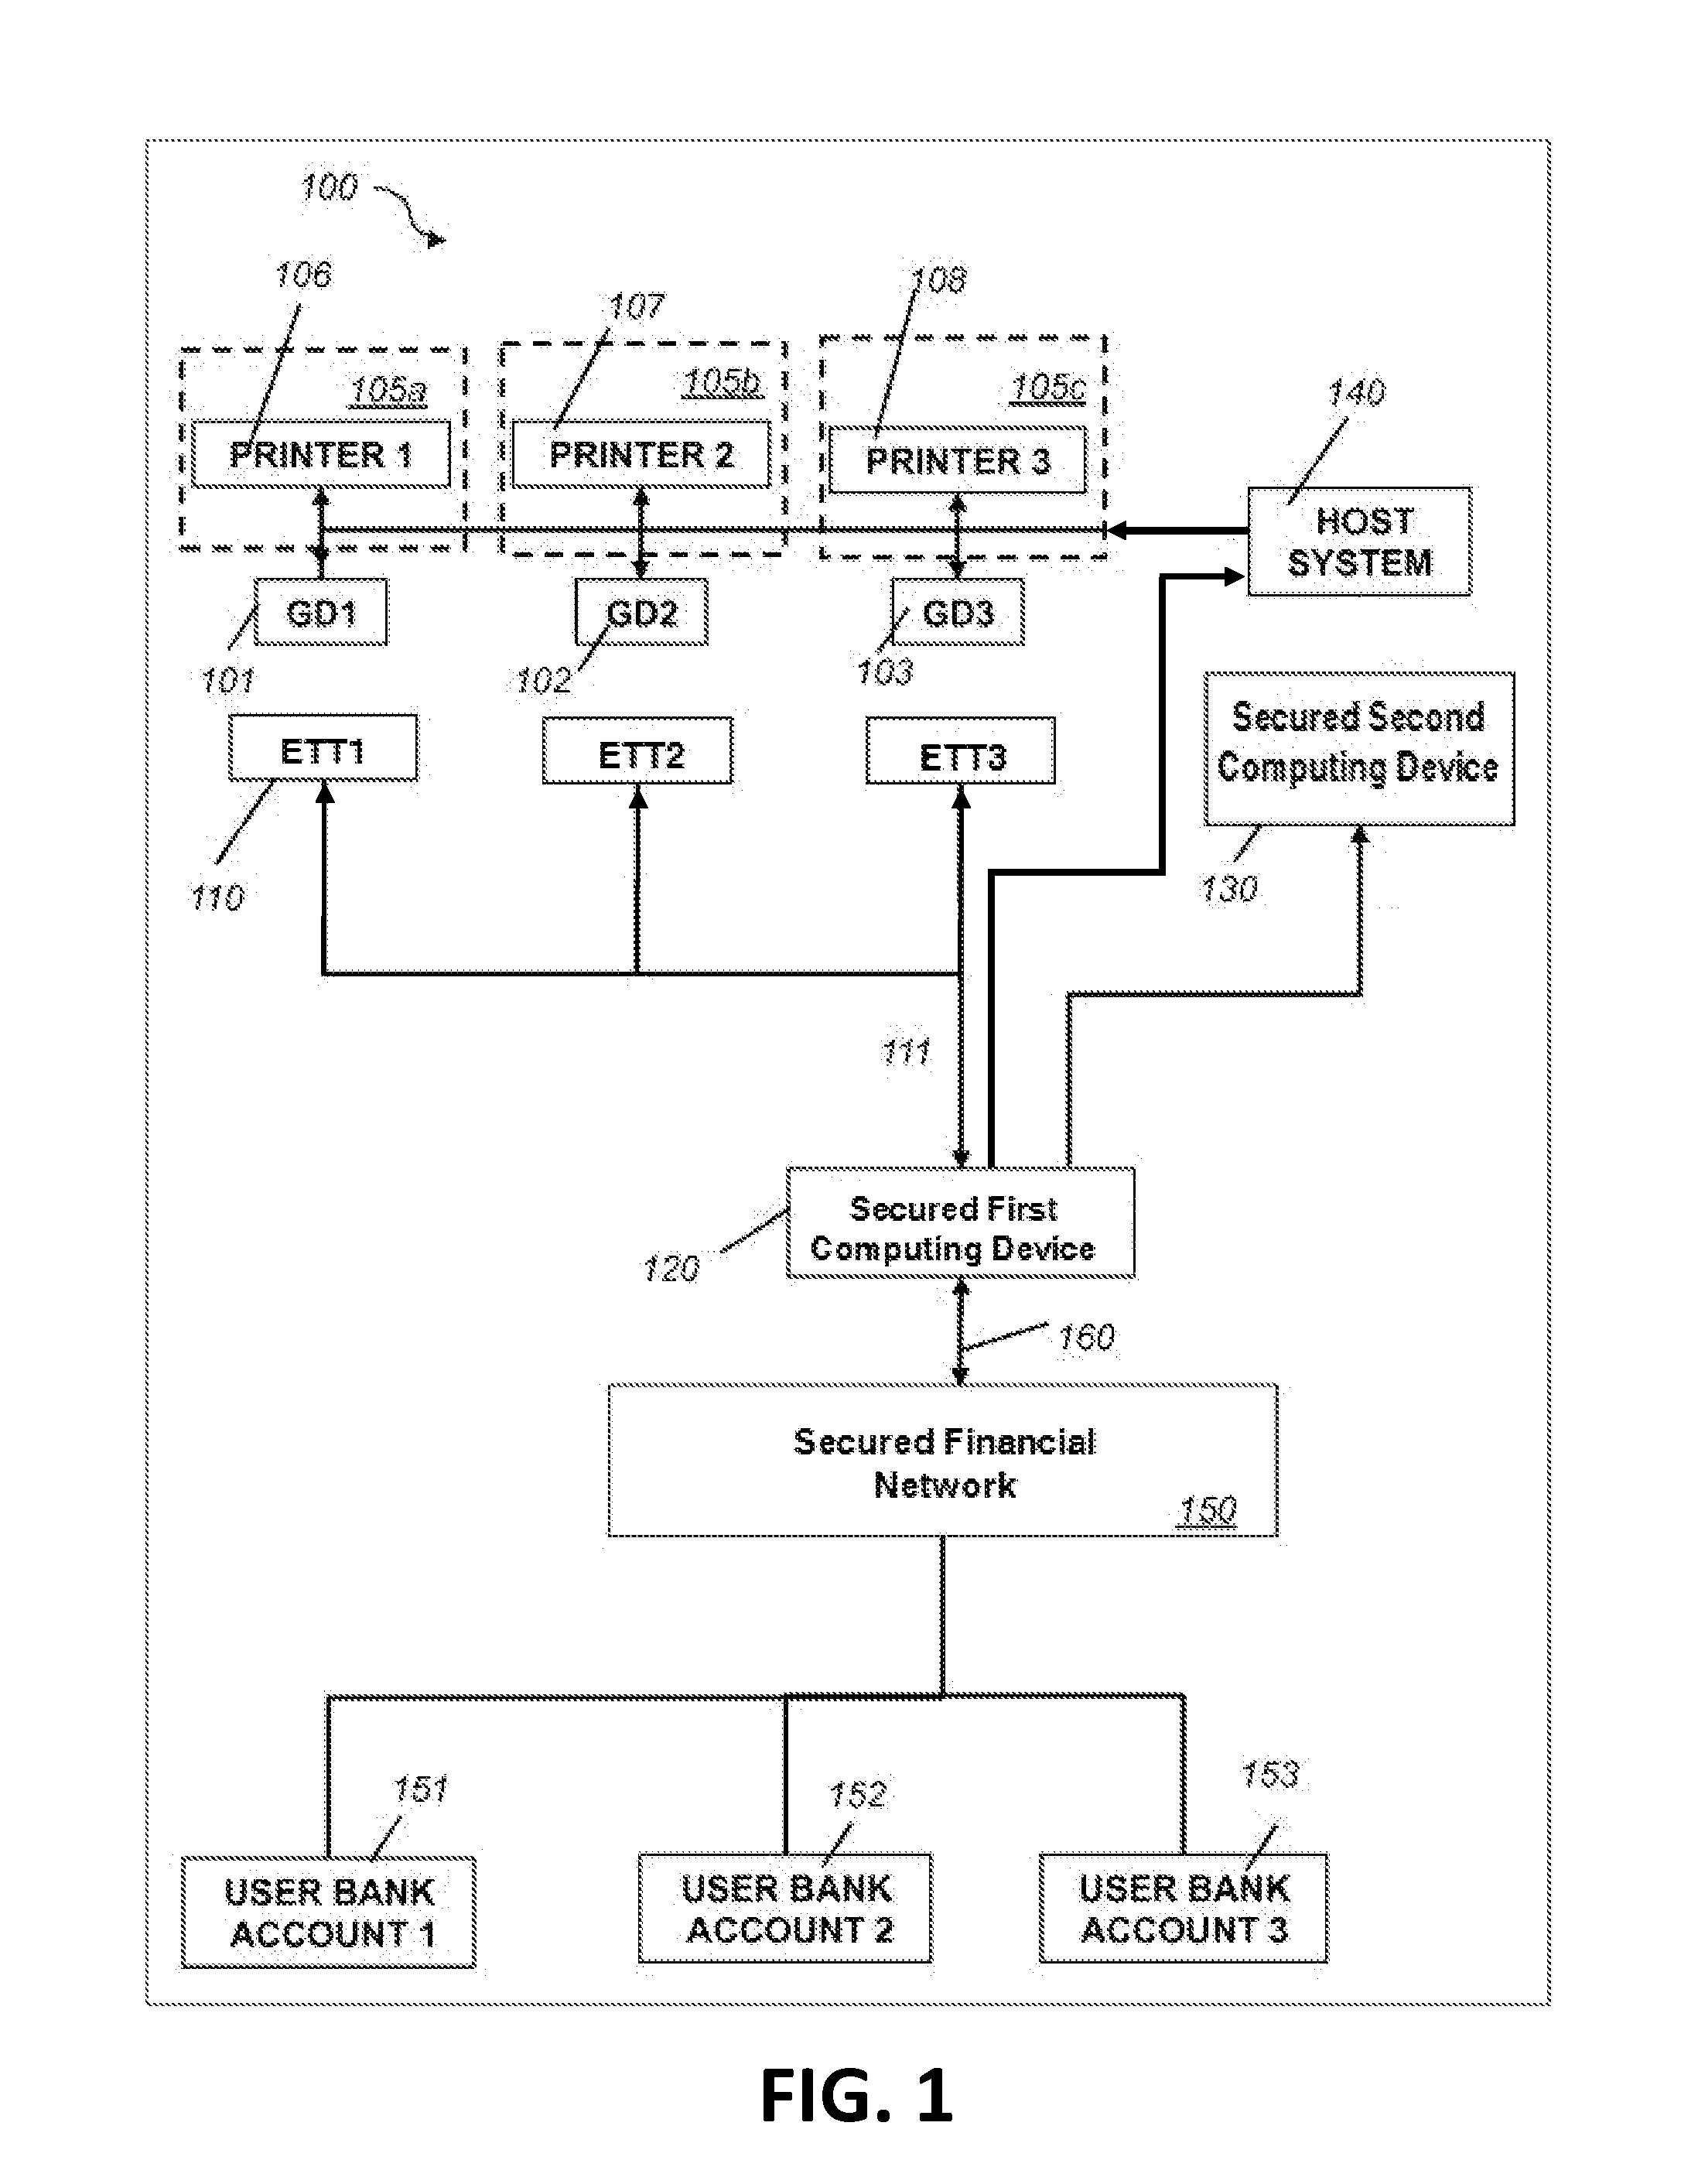 Electronic transaction systems and methods for gaming or amusement credit purchases